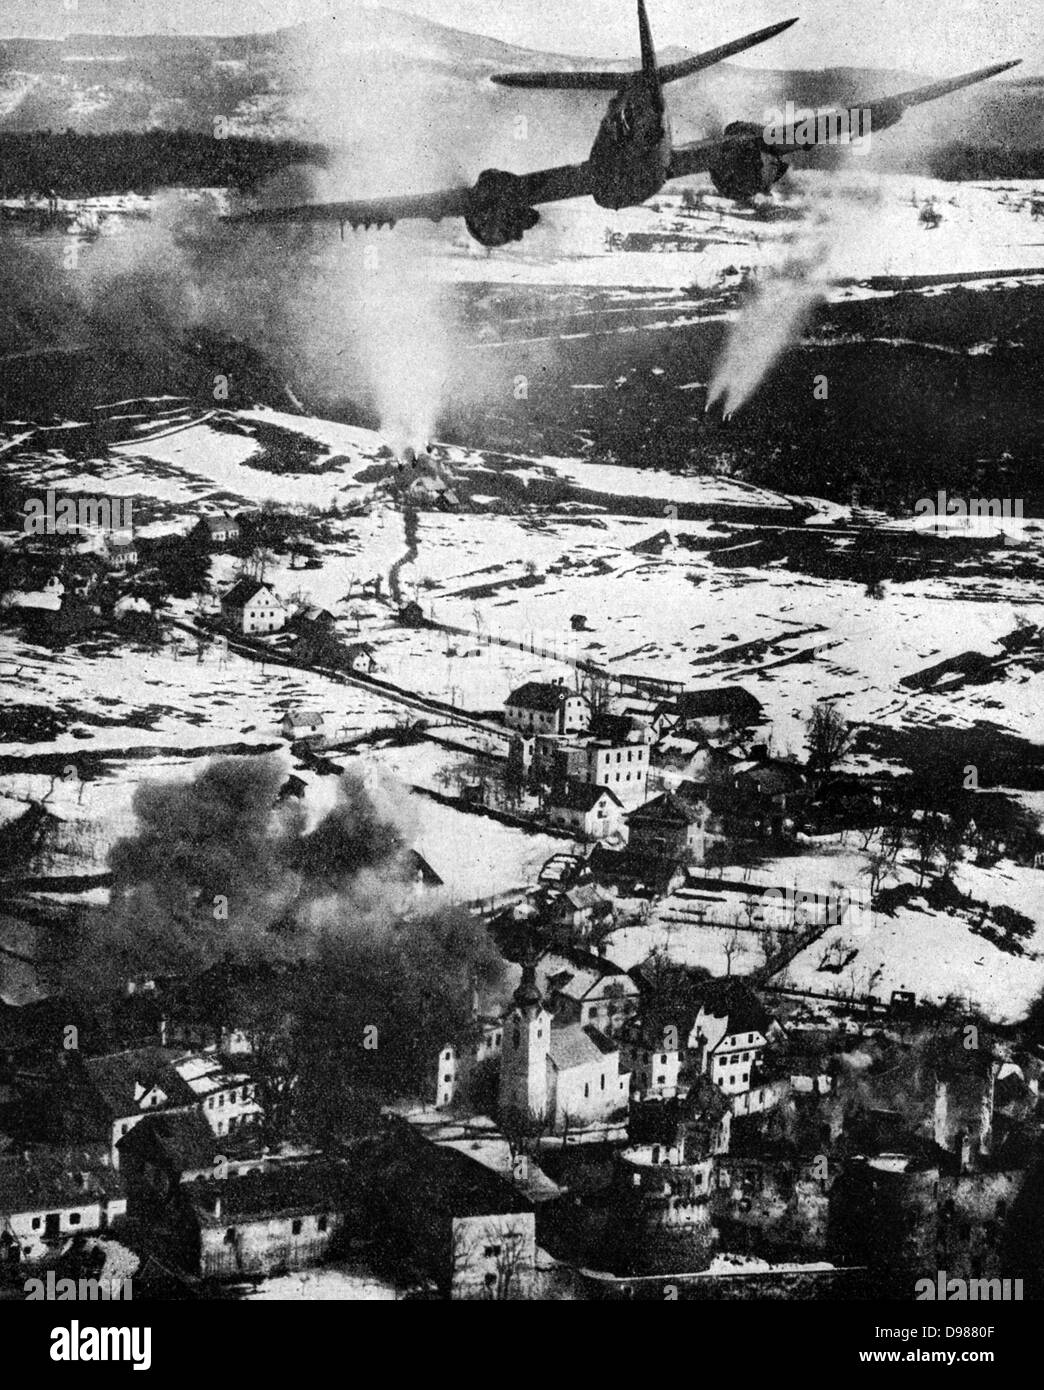 Balkan Air Force Strikes in Yugoslavia.  Here a South African Air Force Squadron serving with the Balkan Air Force attacks with rocket-firing Beaufighters targets in the German-occupied town of Zuzemberk, Yugoslavia, early in 1945. Stock Photo